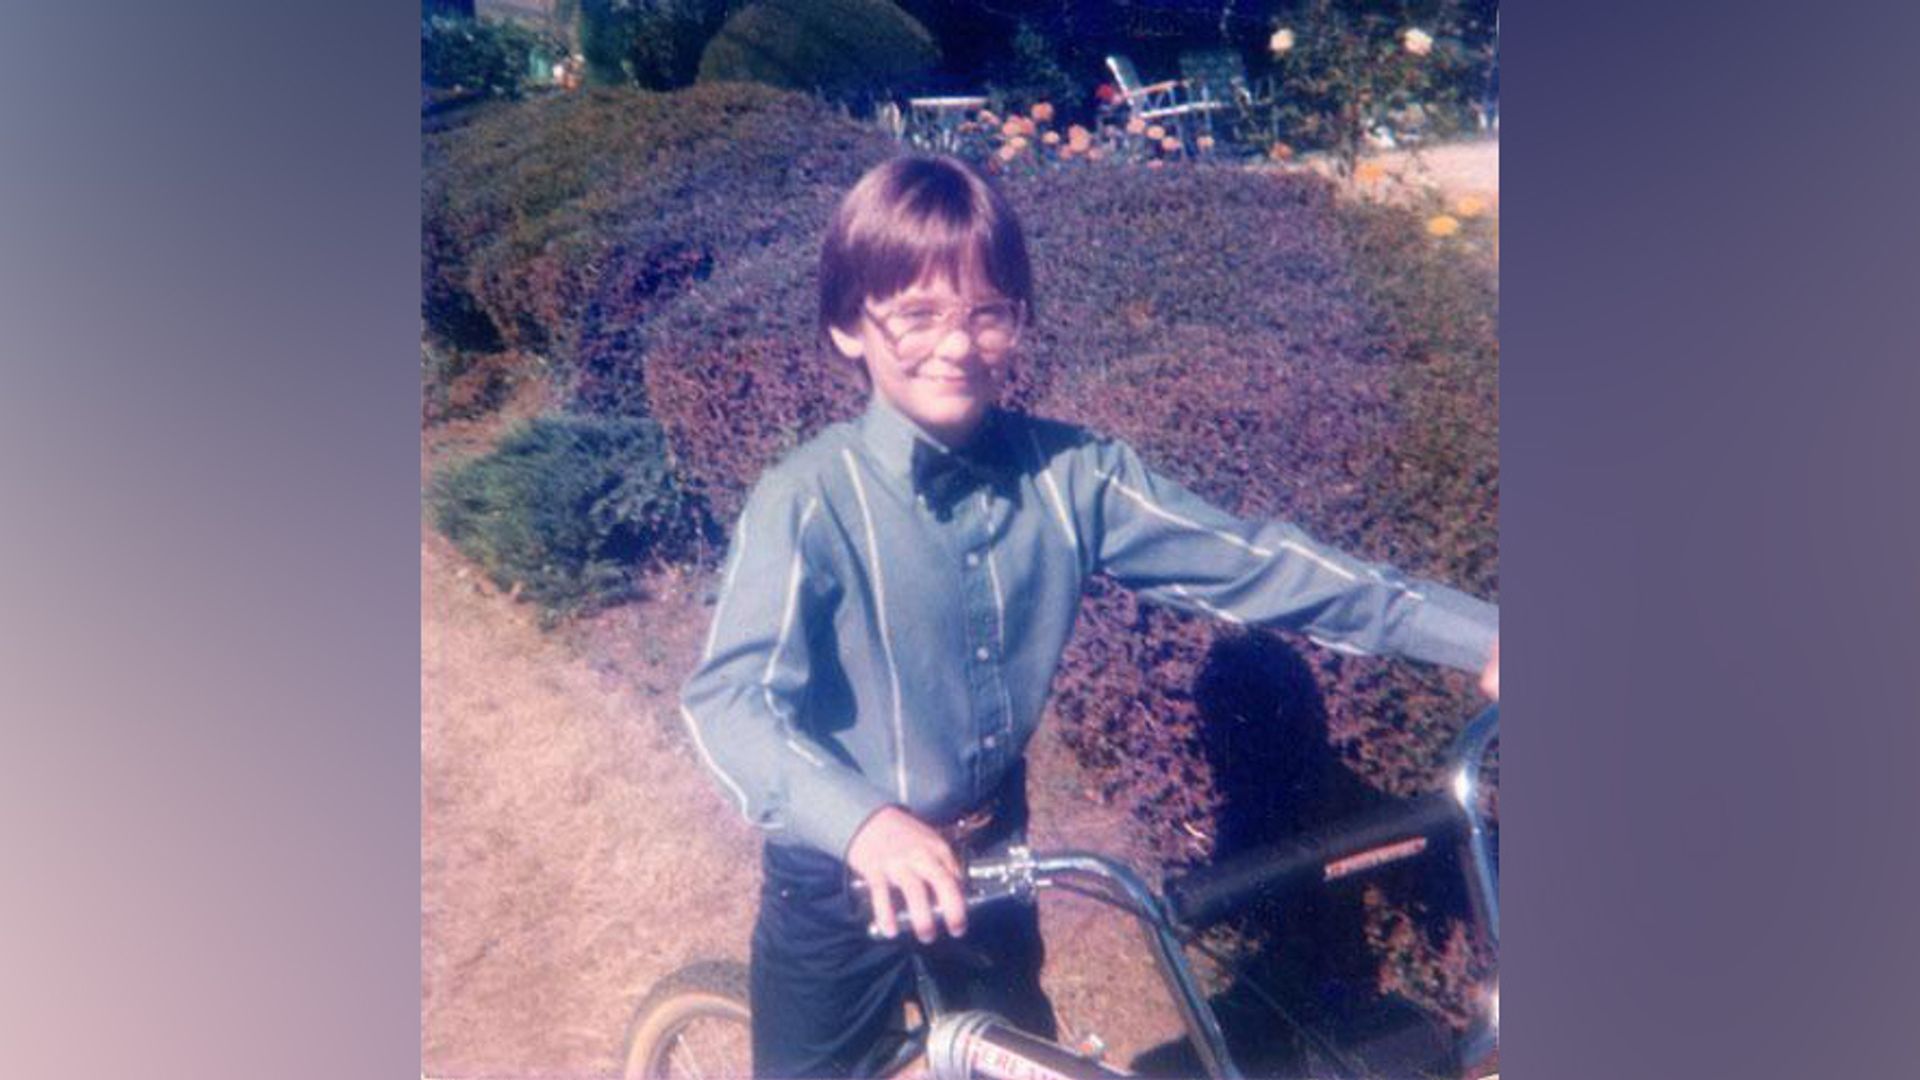 Child's photo of Tobey Maguire